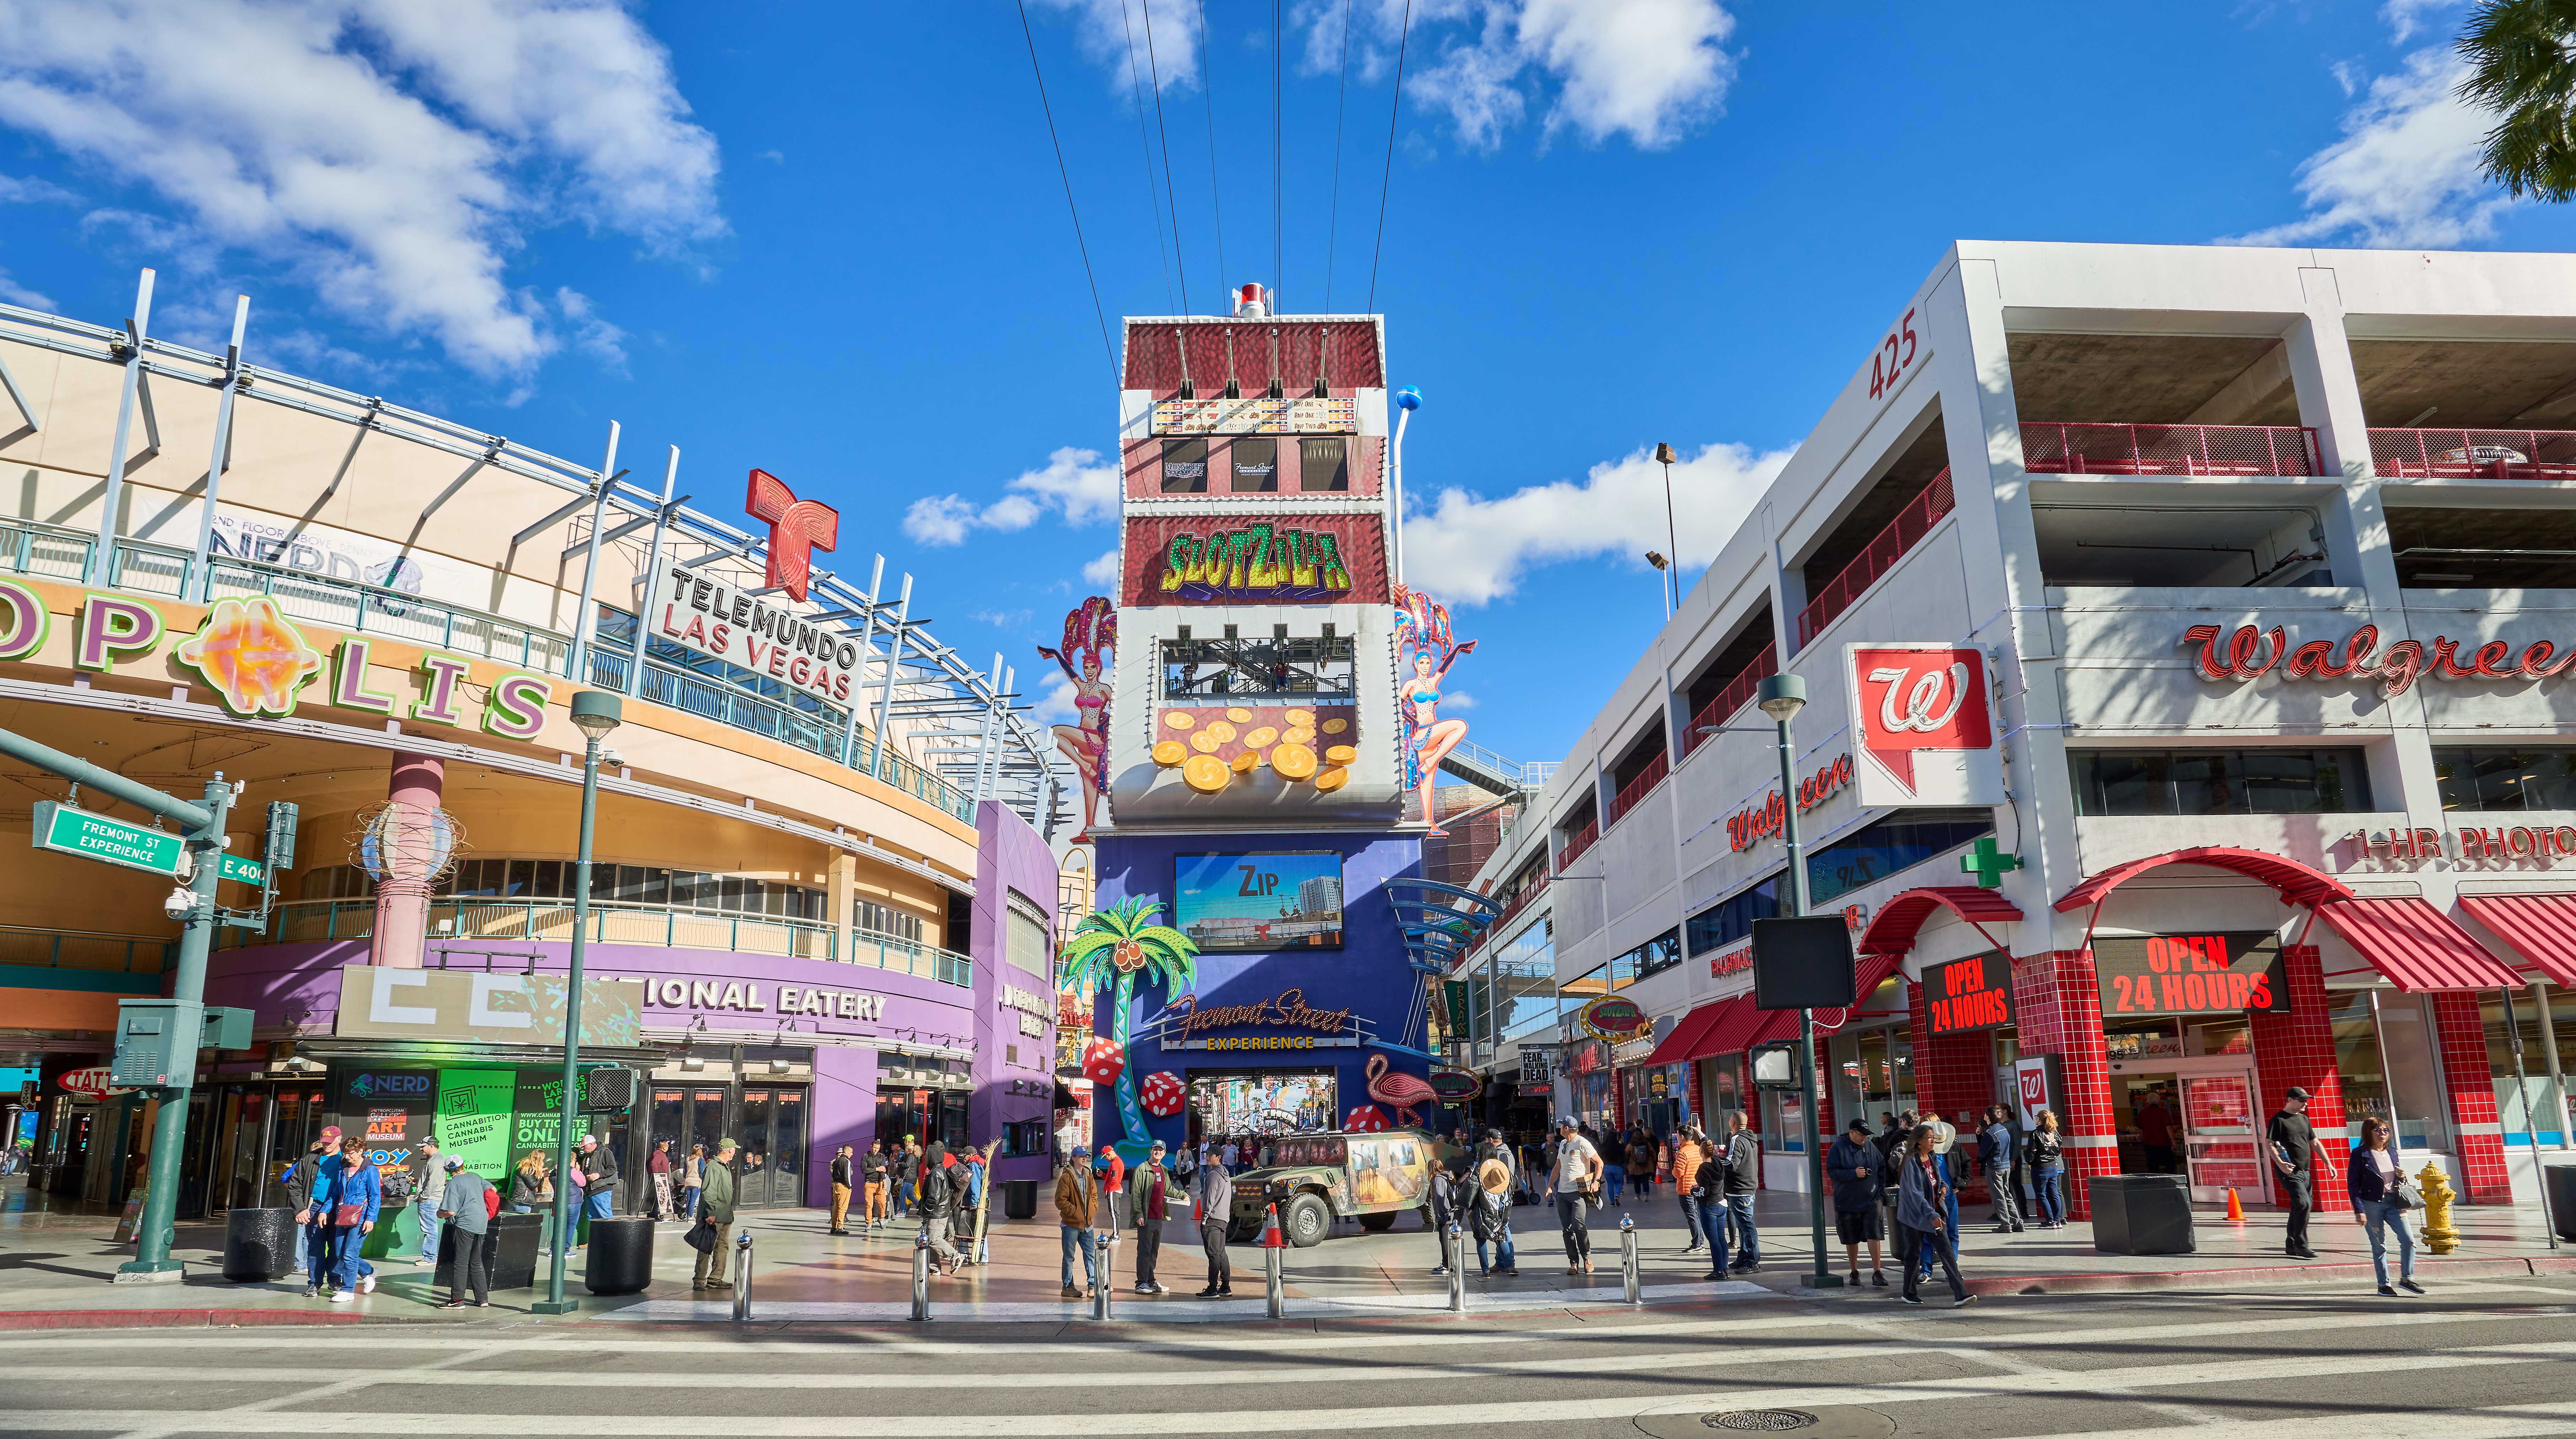 Must-See Las Vegas Attractions That Aren't Casinos | Reader's Digest